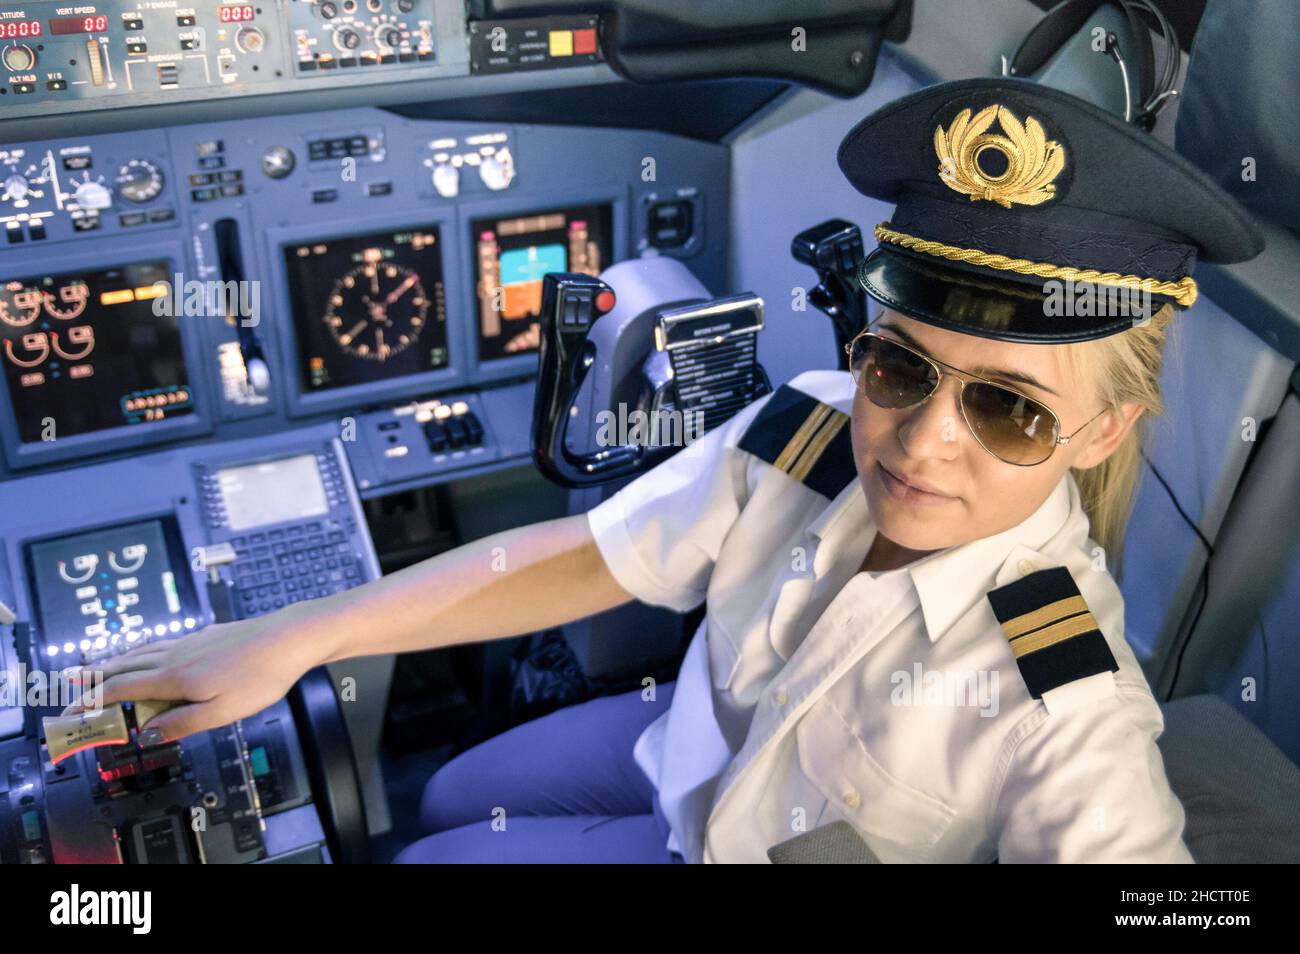 Beautiful blonde woman pilot wearing uniform and hat with golden wings - Modern aircraft cockpit ready for take off Stock Photo